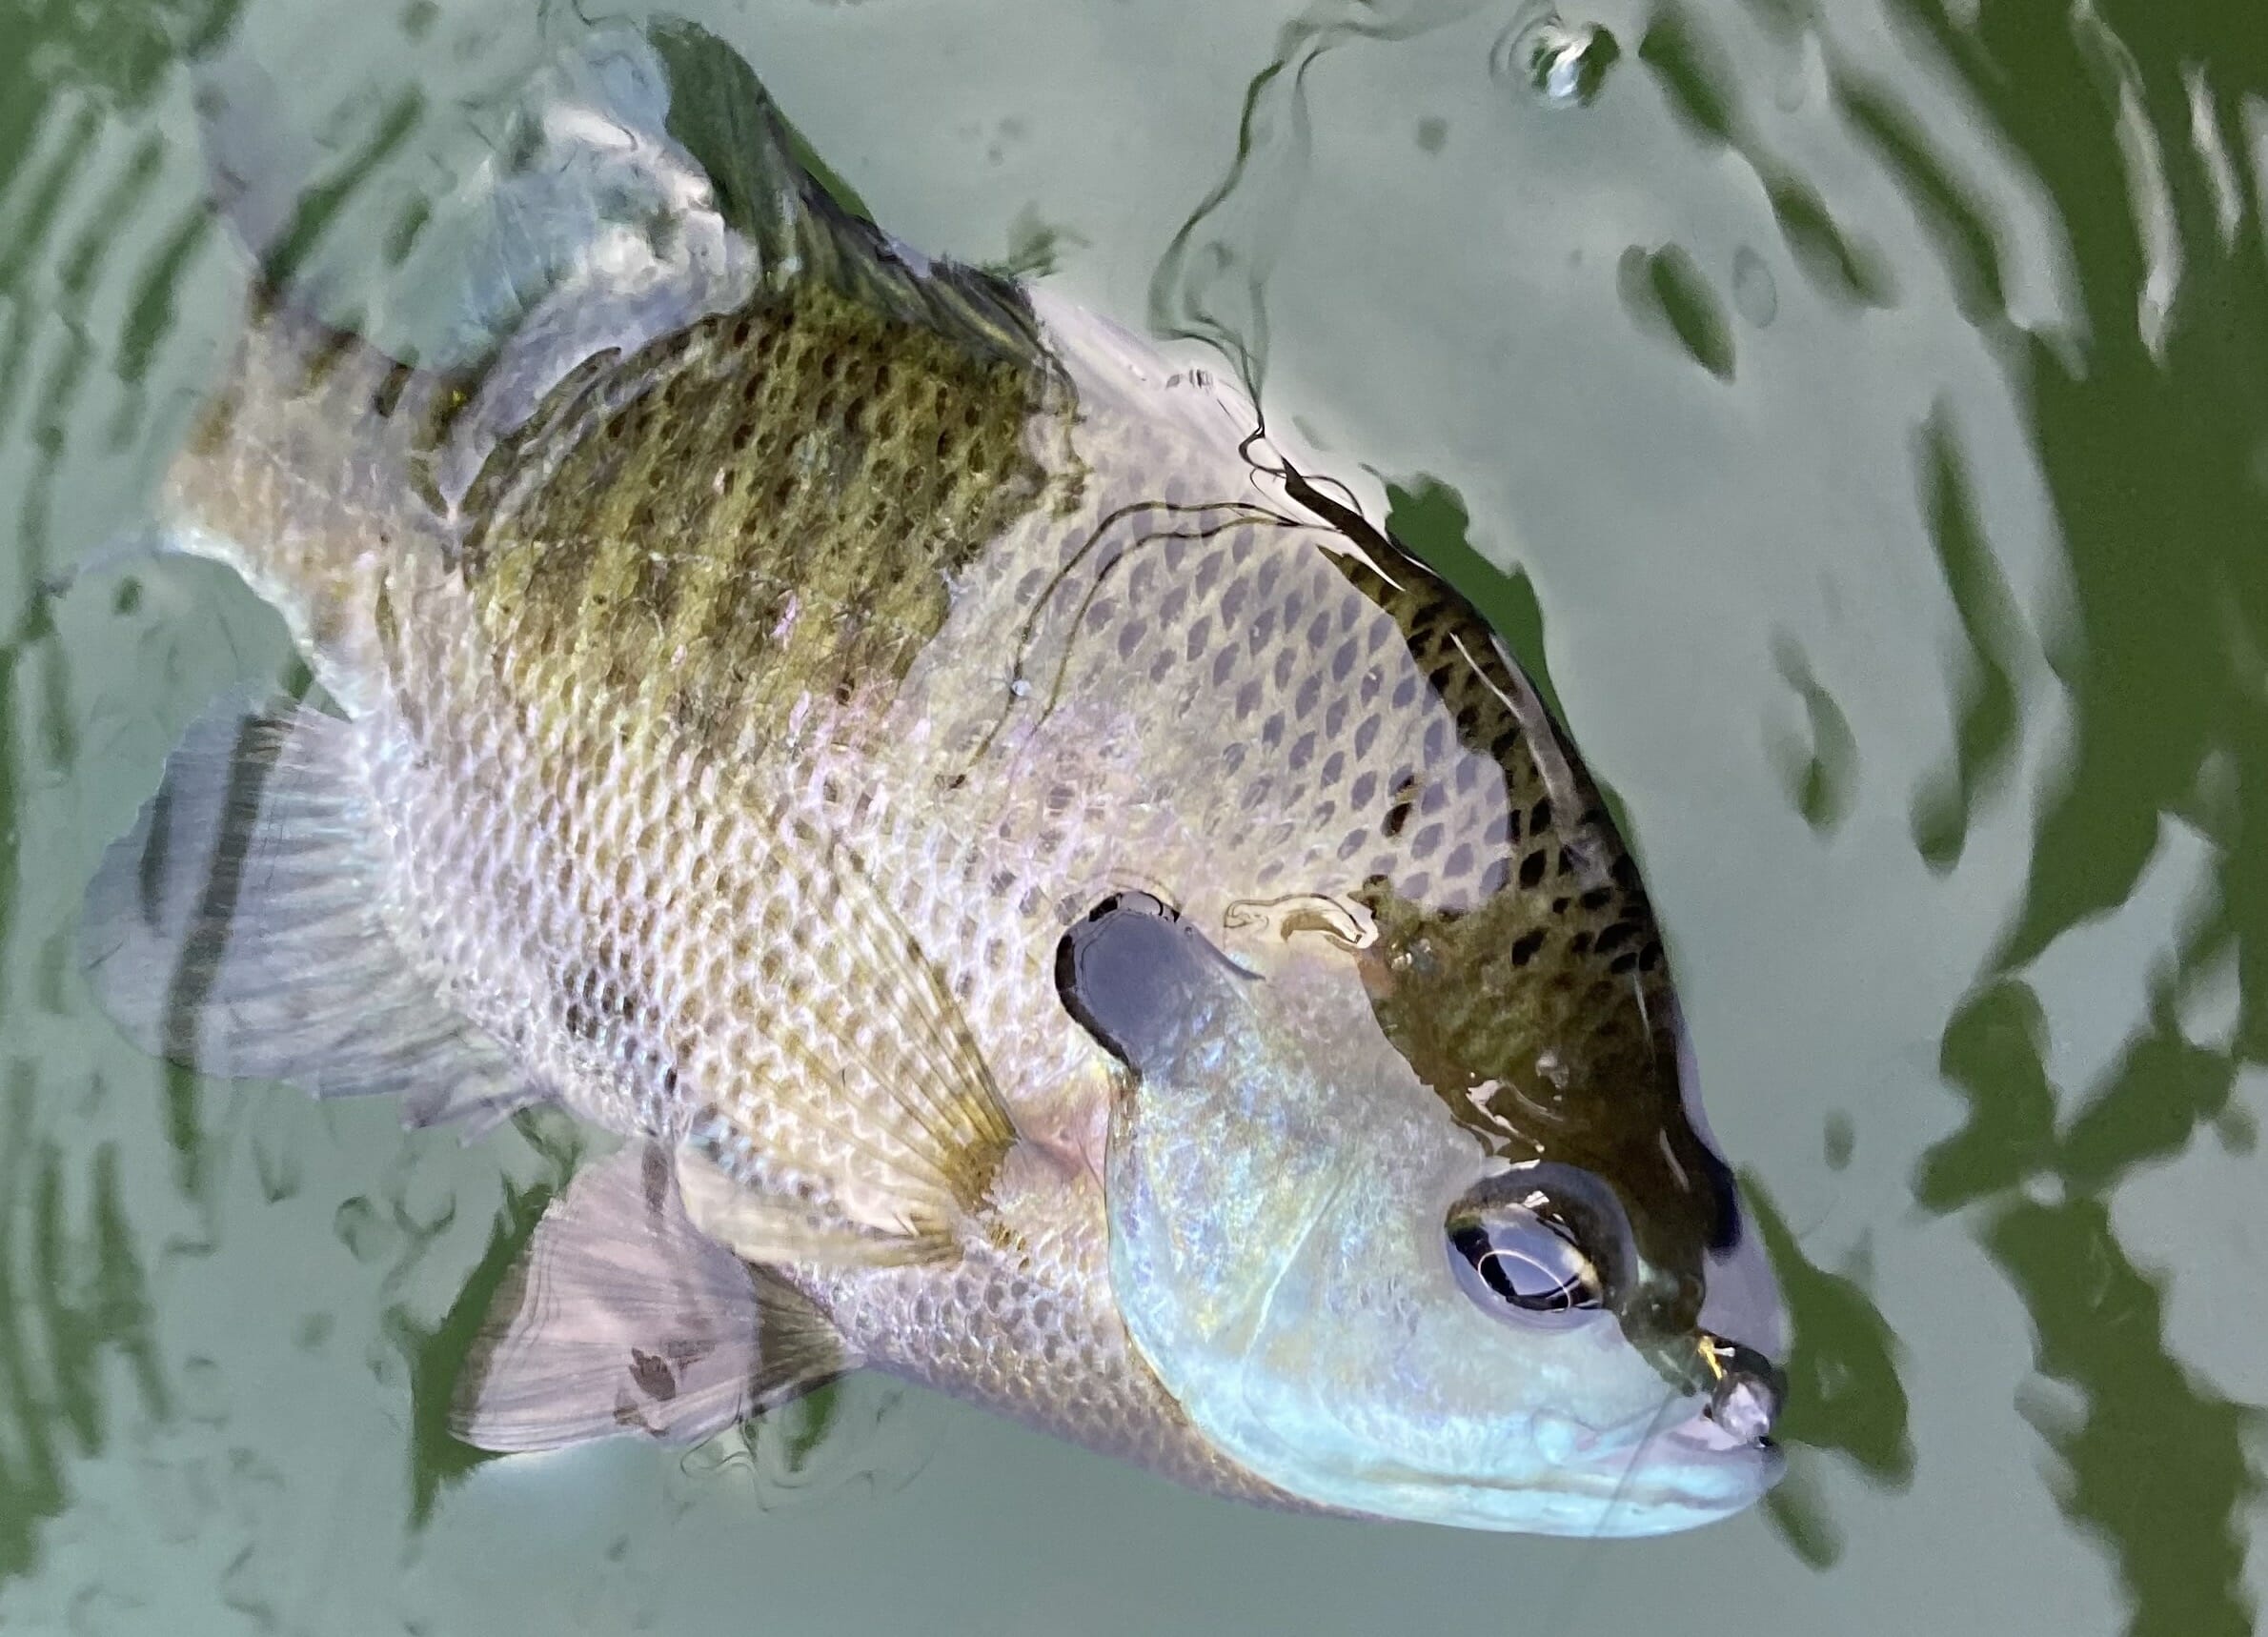 Summer Sunfish Come To The Rescue As Trout Waters Heat Up - Trout